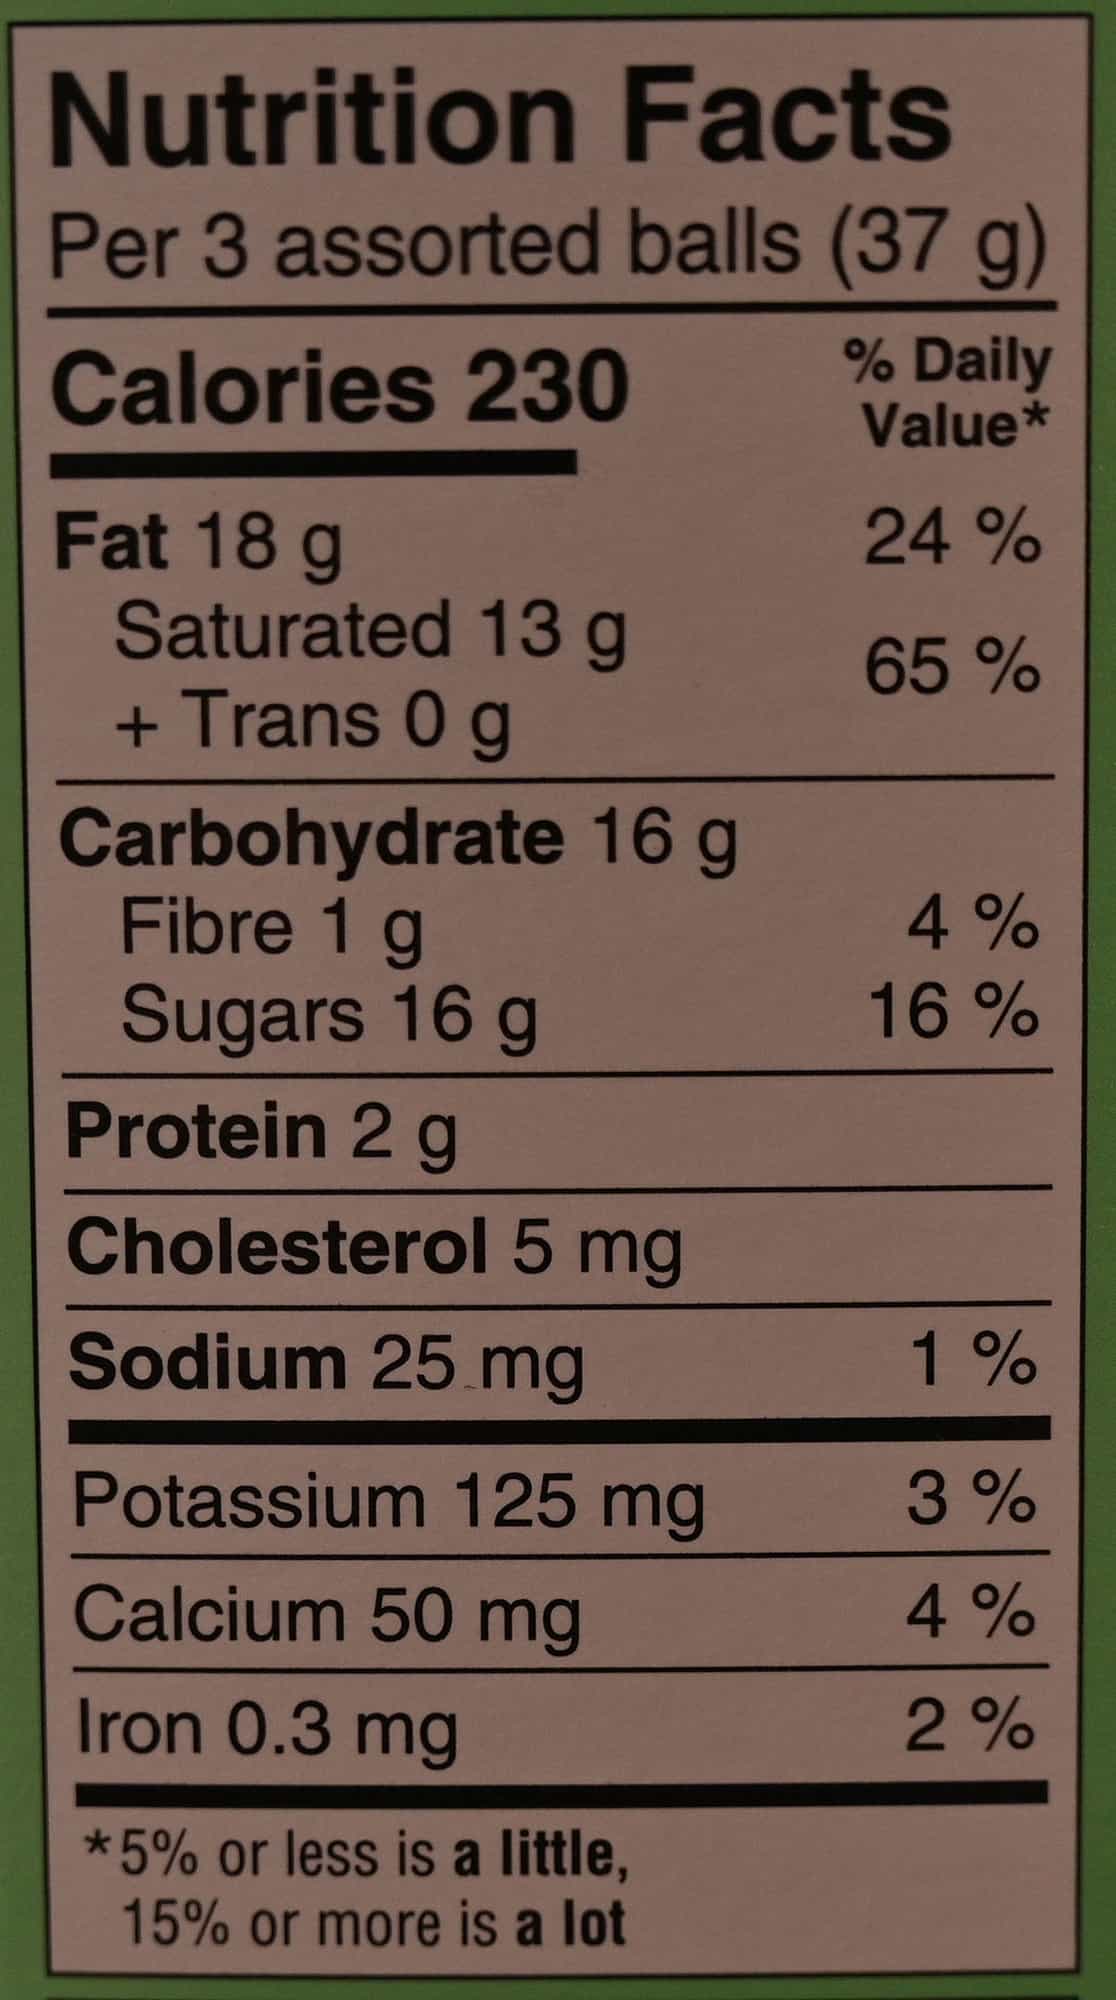 Image of the limited edition Easter box nutrition facts.